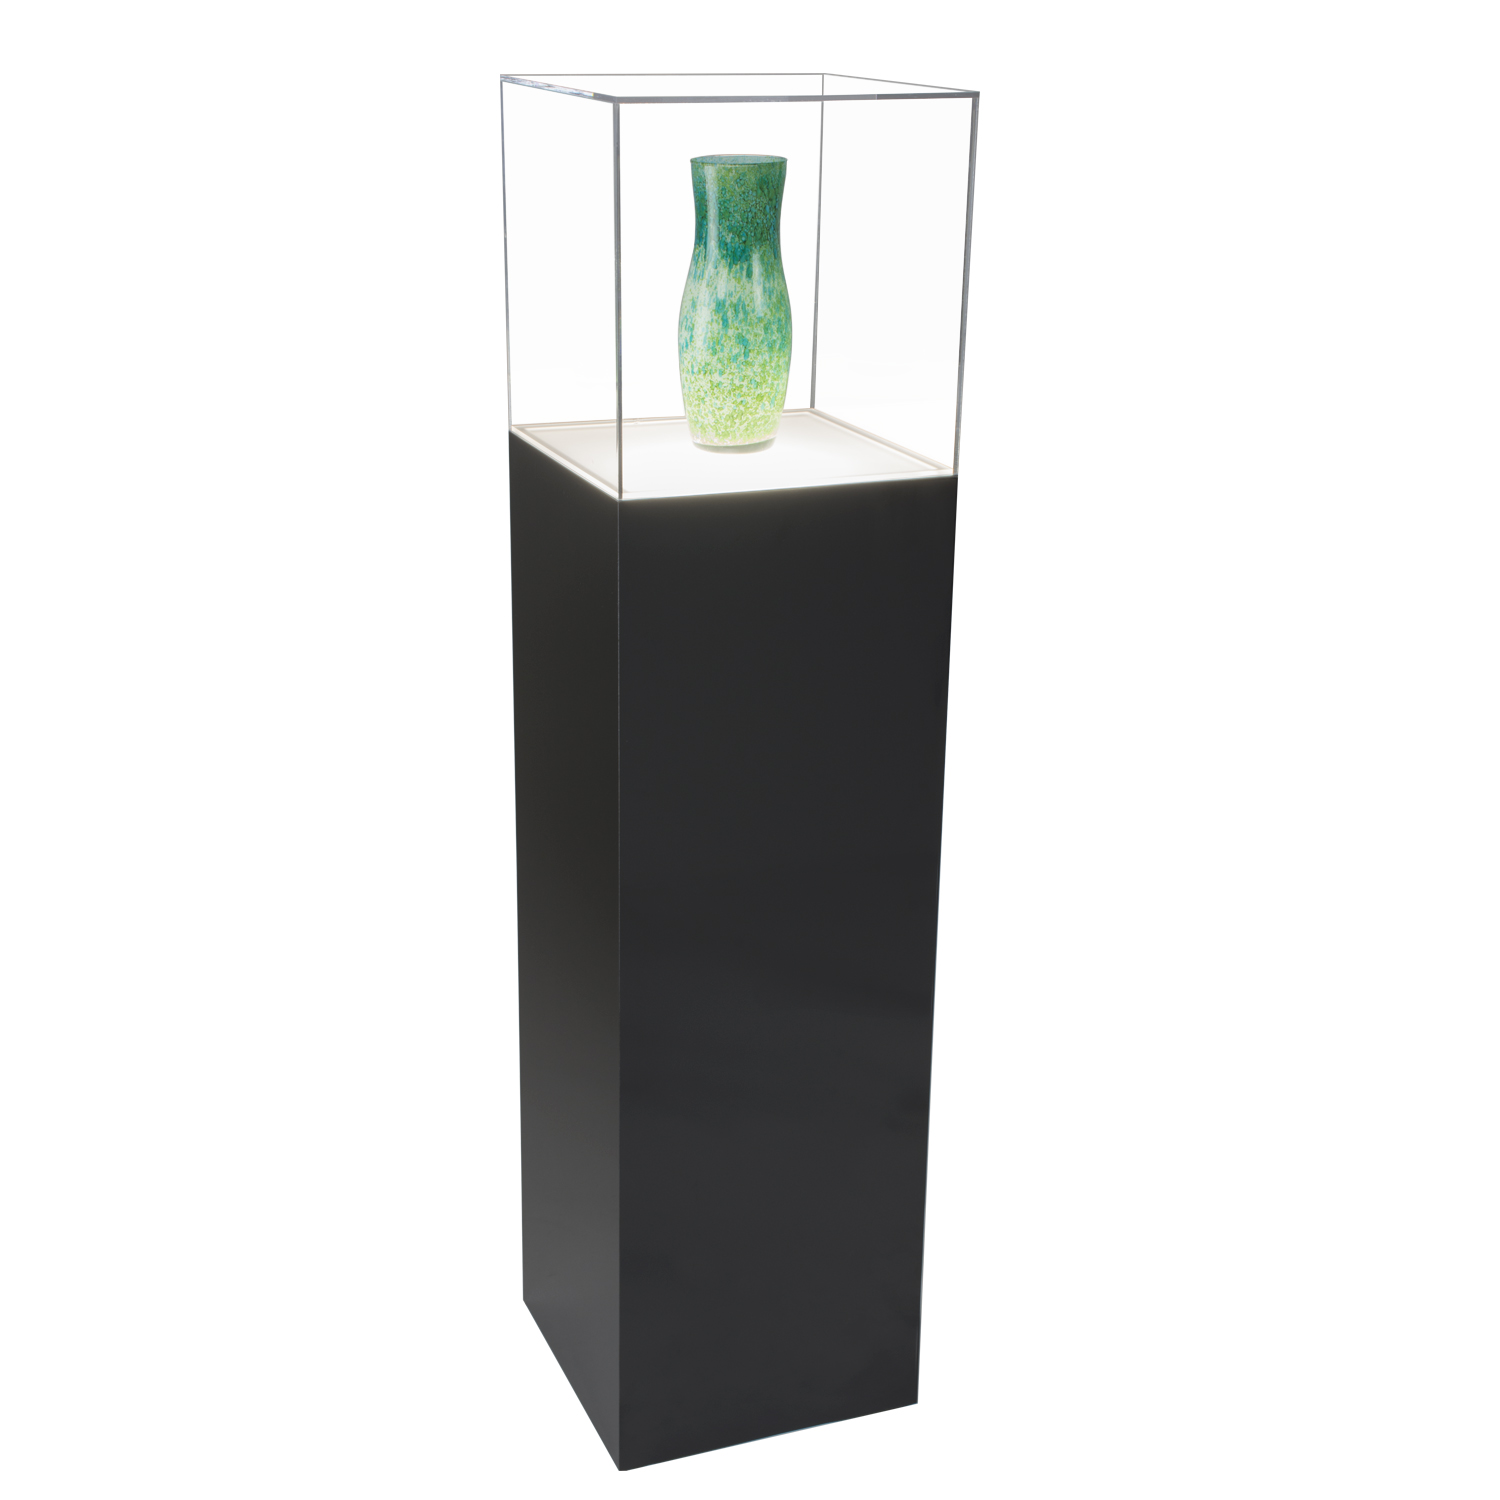 Gloss Black Laminate Display Case with Acrylic Cover | shopPOPdisplays